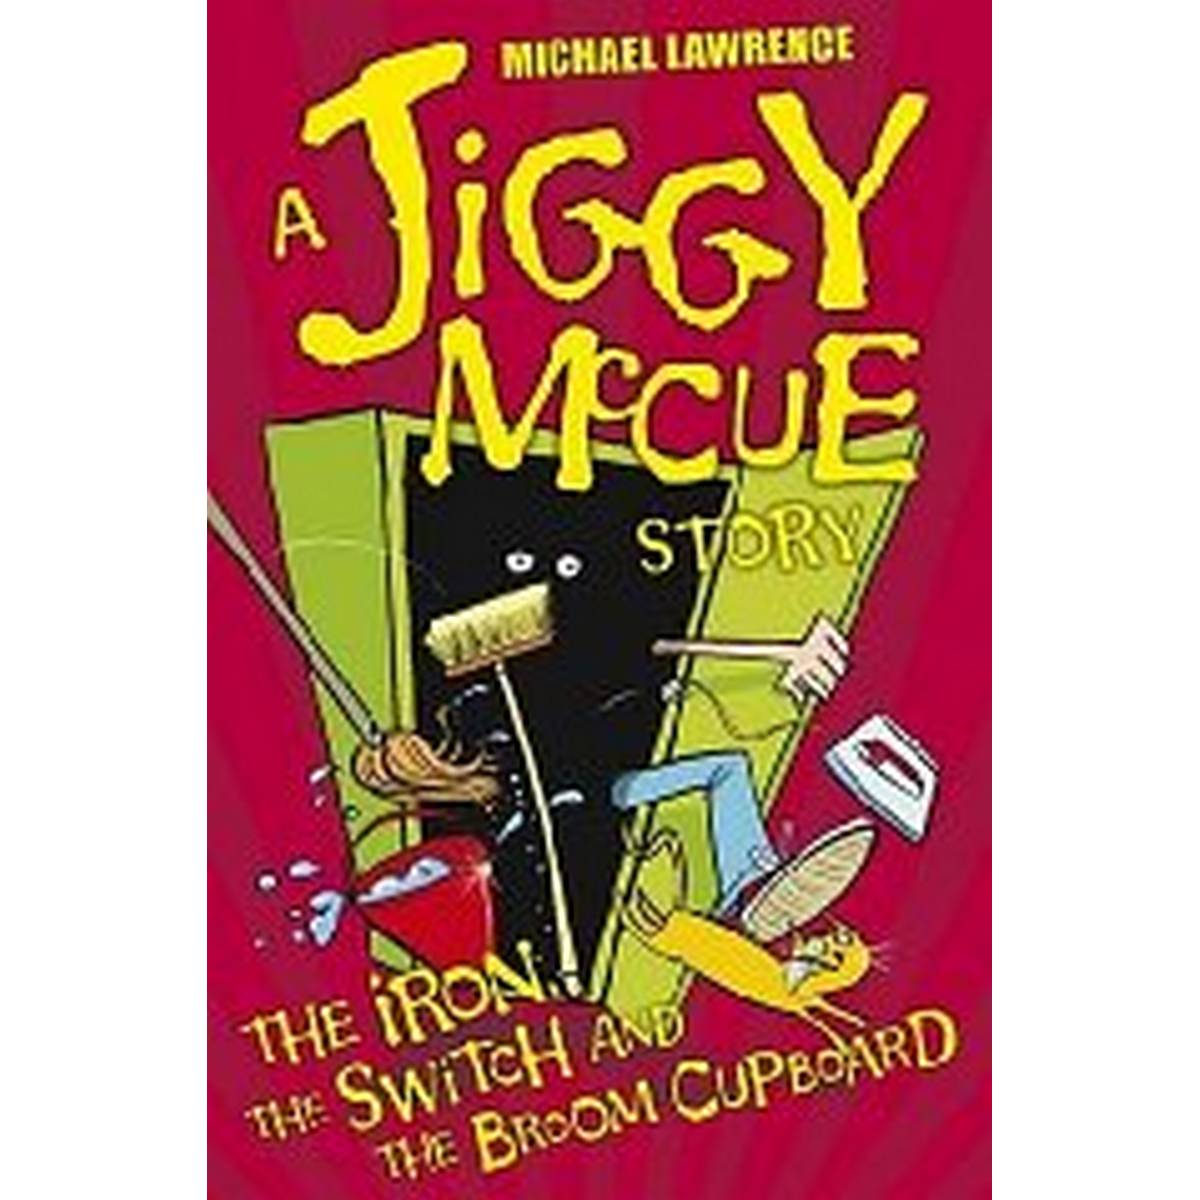 The Iron, the Switch and the Broom Cupboard (Jiggy McCue)